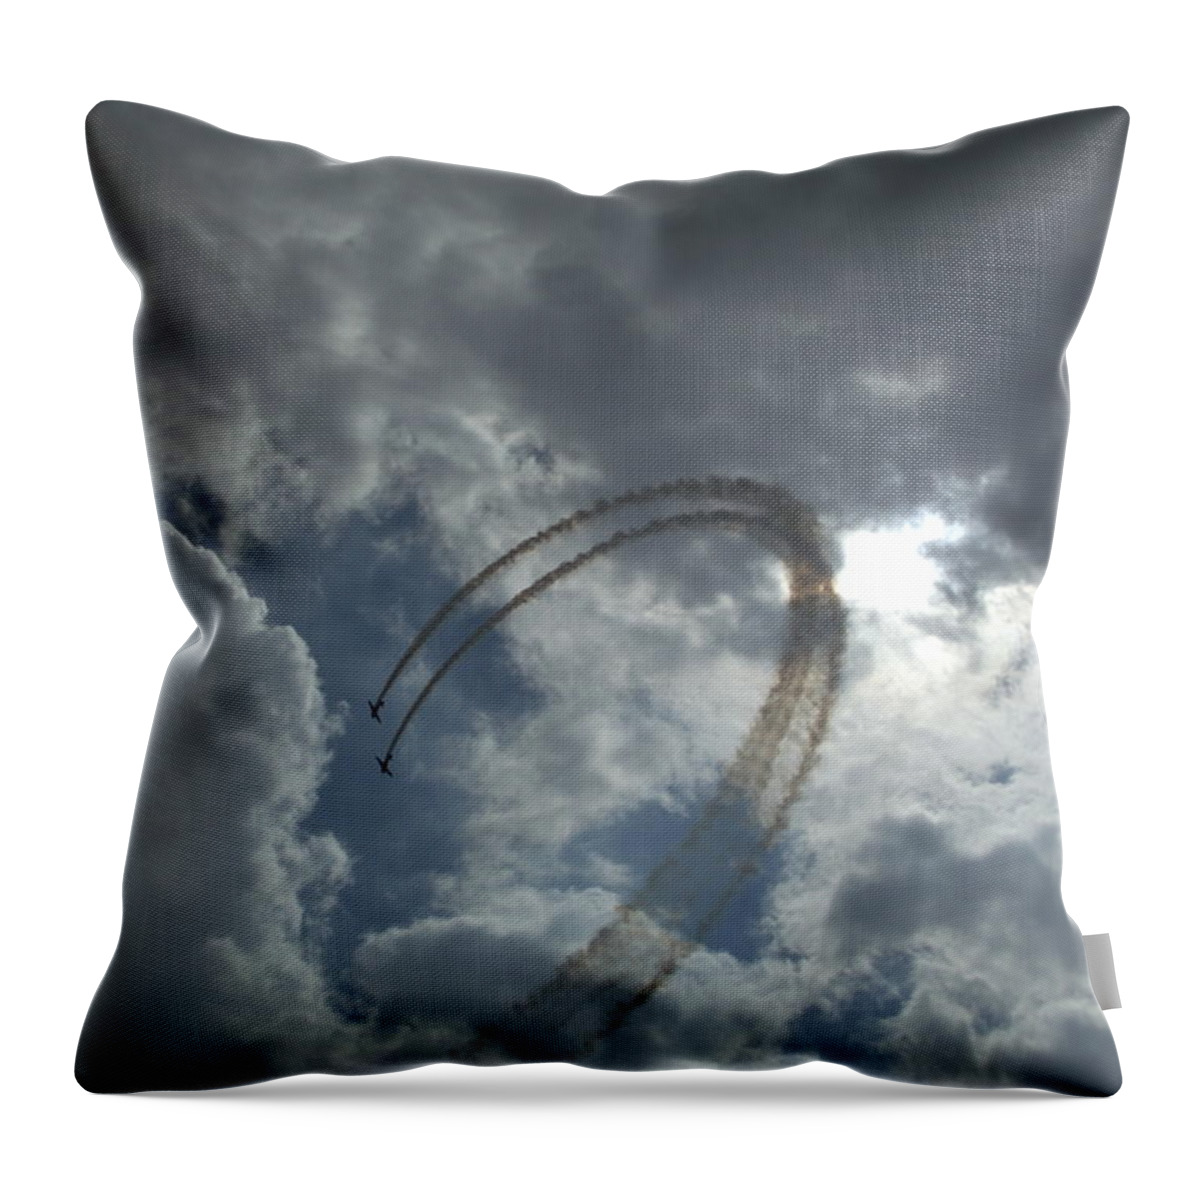 River Throw Pillow featuring the photograph Aerial Display by Steve Kearns